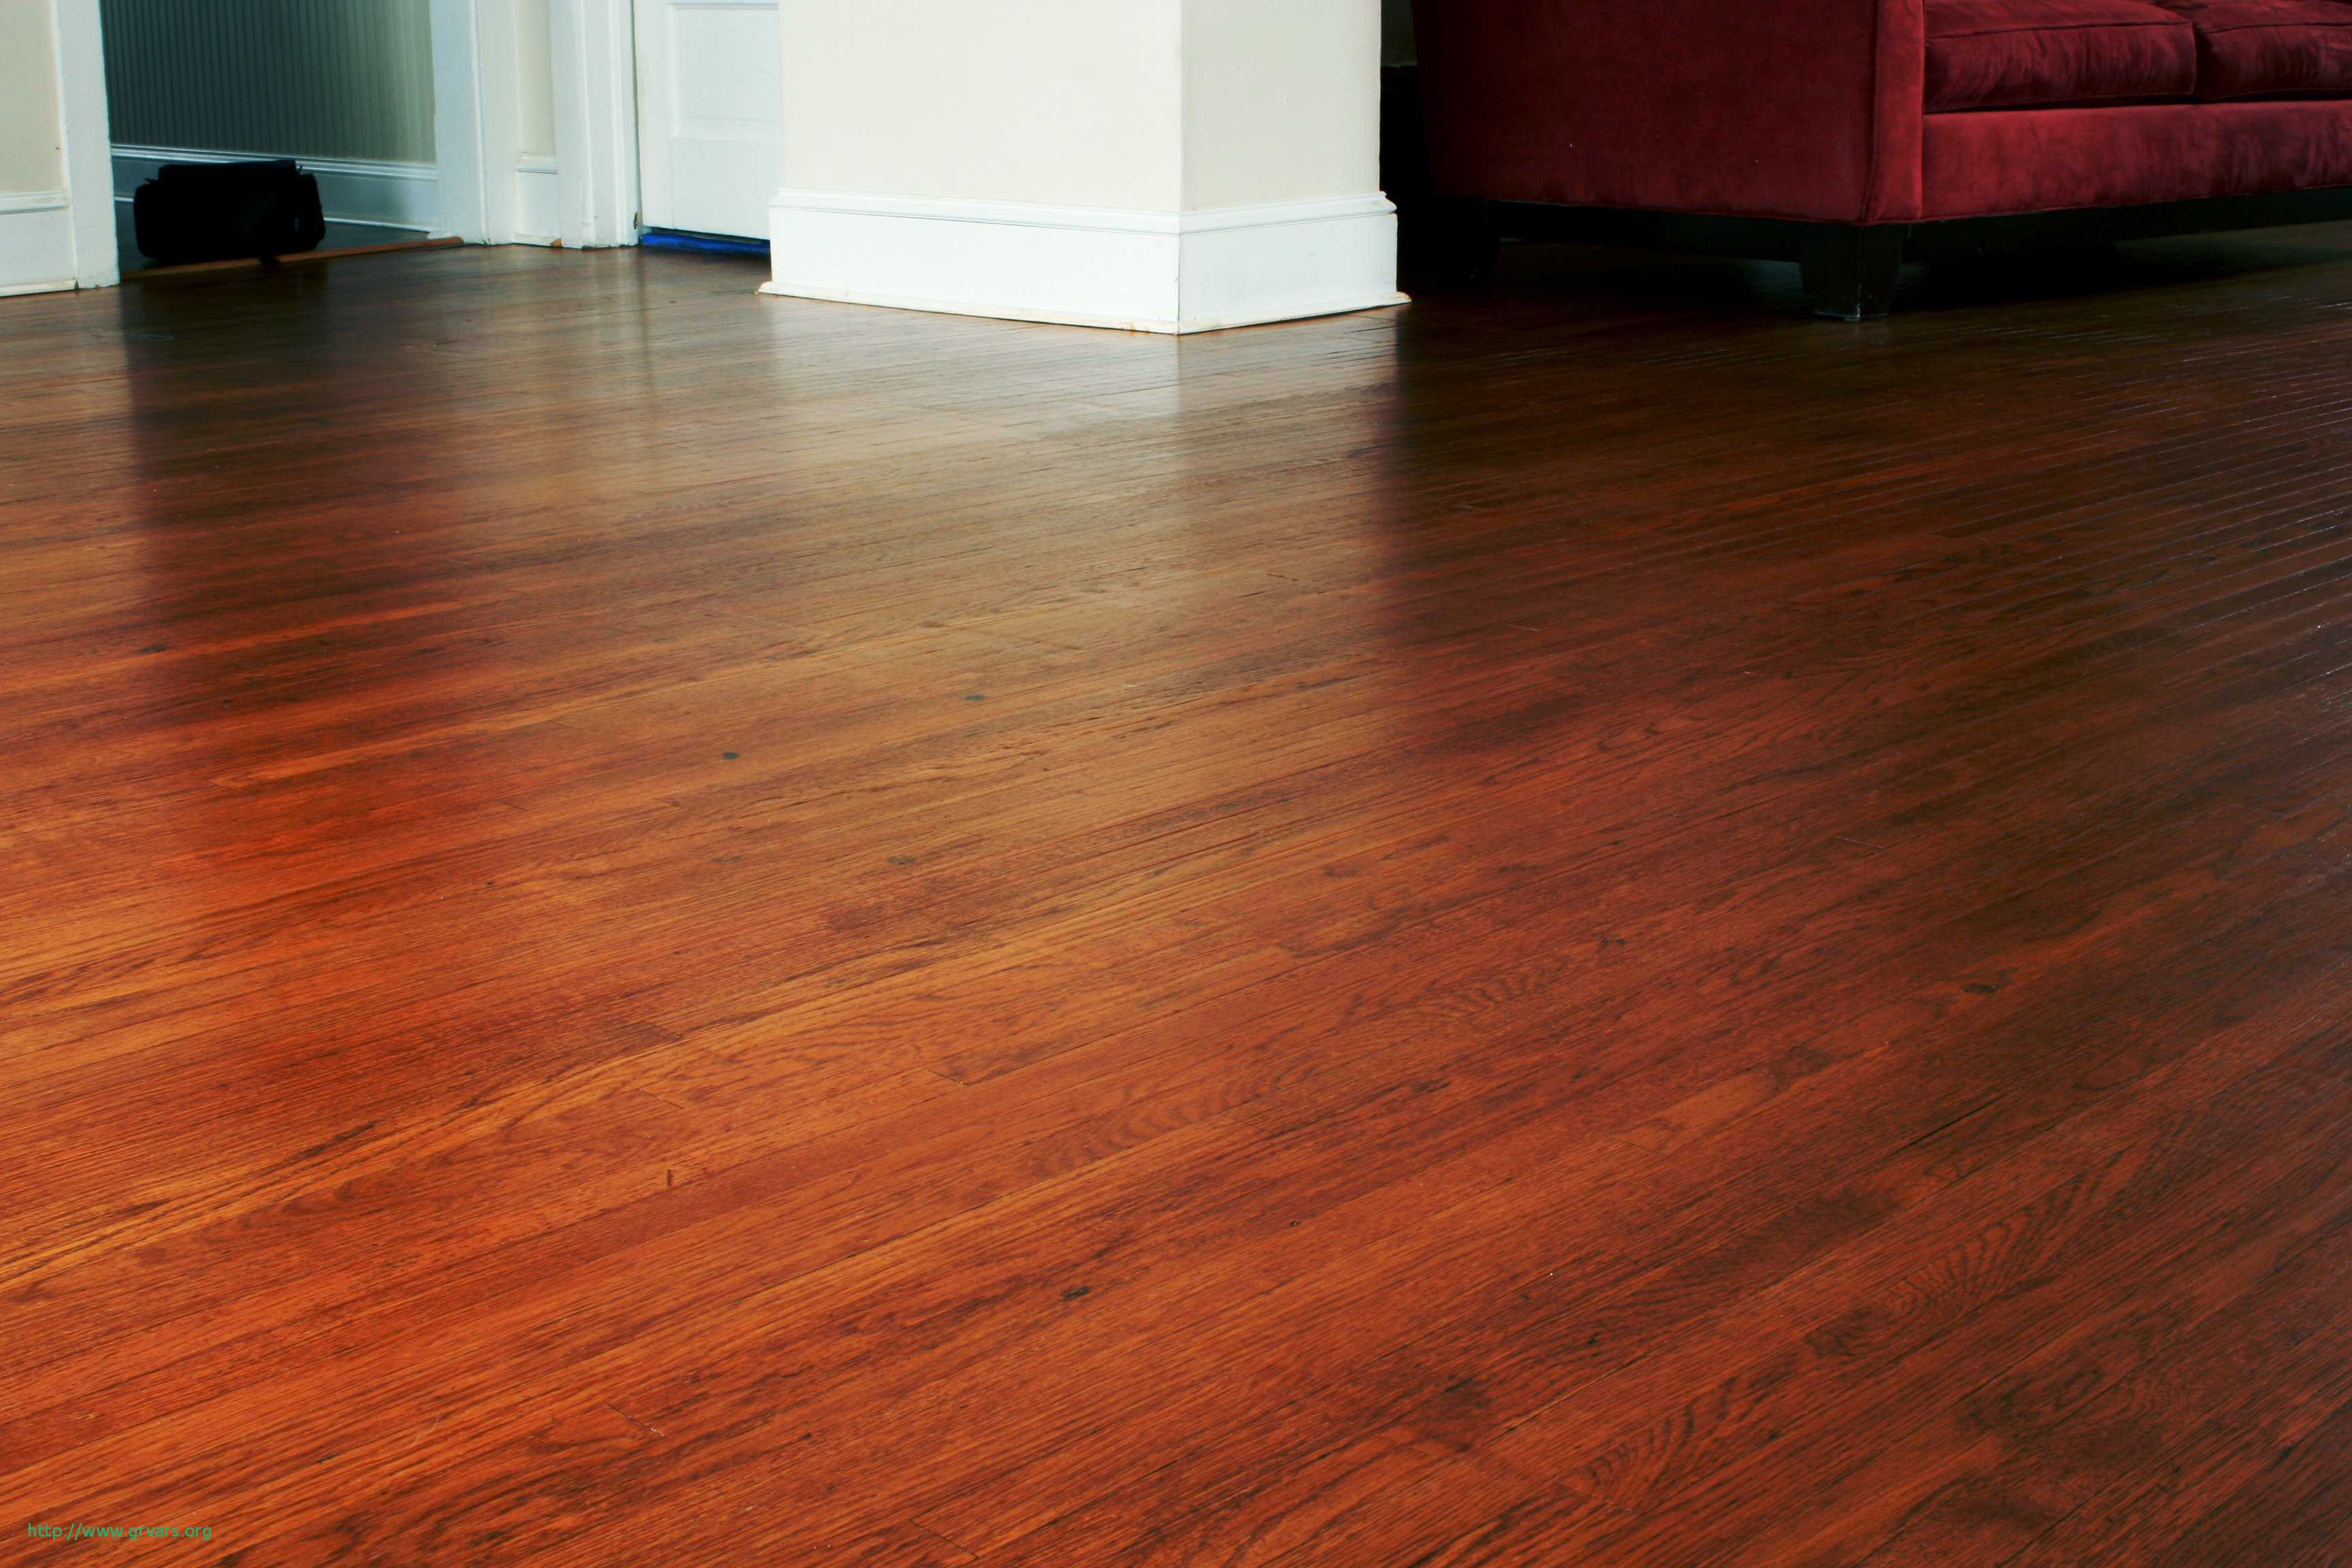 10 Fabulous How to Clean Hardwood Floors Under Carpet 2024 free download how to clean hardwood floors under carpet of how to restore hardwood floors under carpet charmant brazilian pertaining to how to restore hardwood floors under carpet inspirant how to diagnos